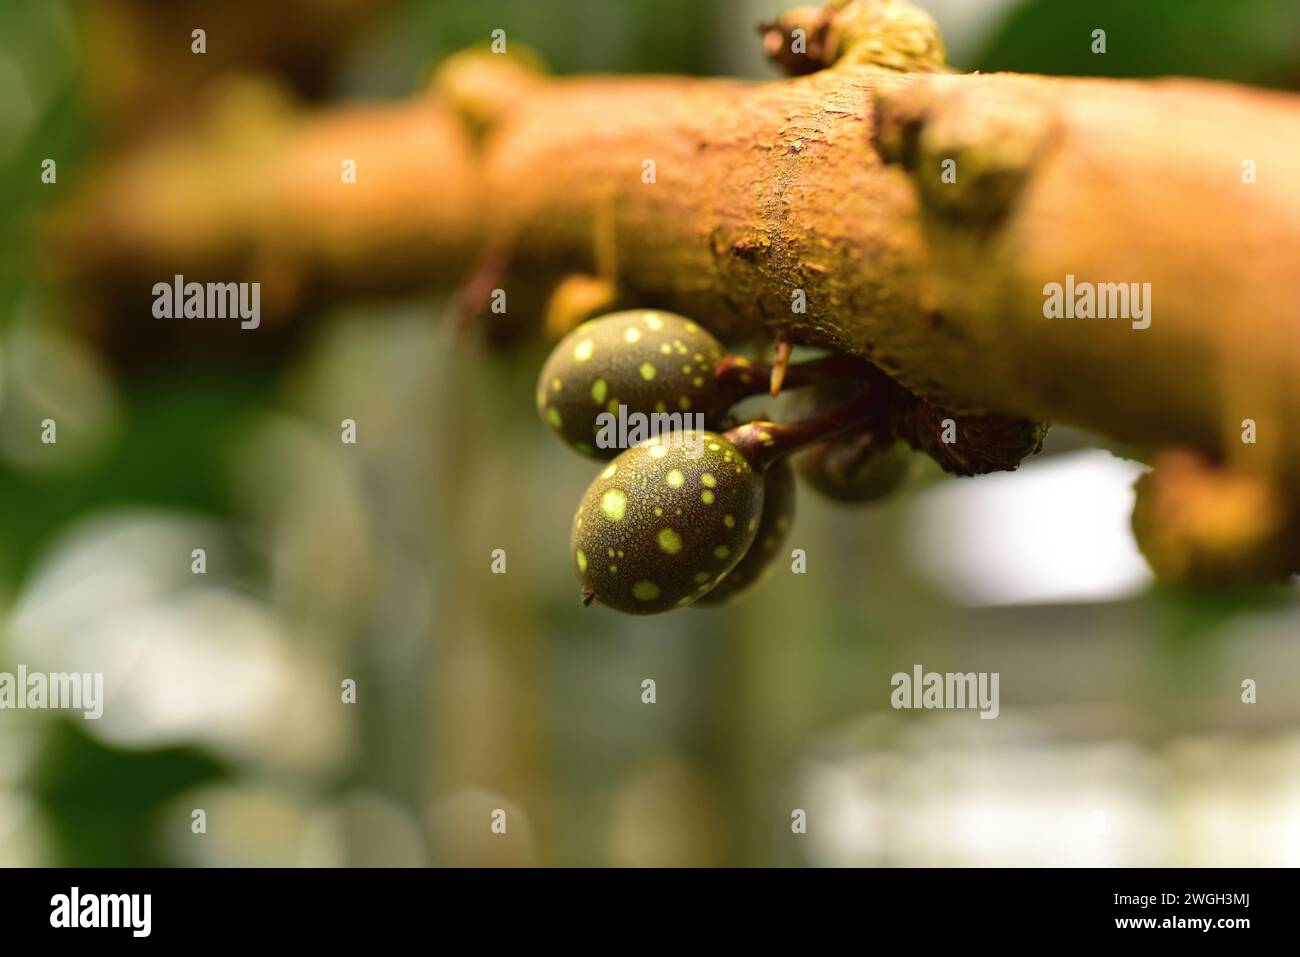 Higueron (Ficus cotinifolia) is a tree native to tropical America, from Mexico to Costa Rica. Fruits detail. Stock Photo